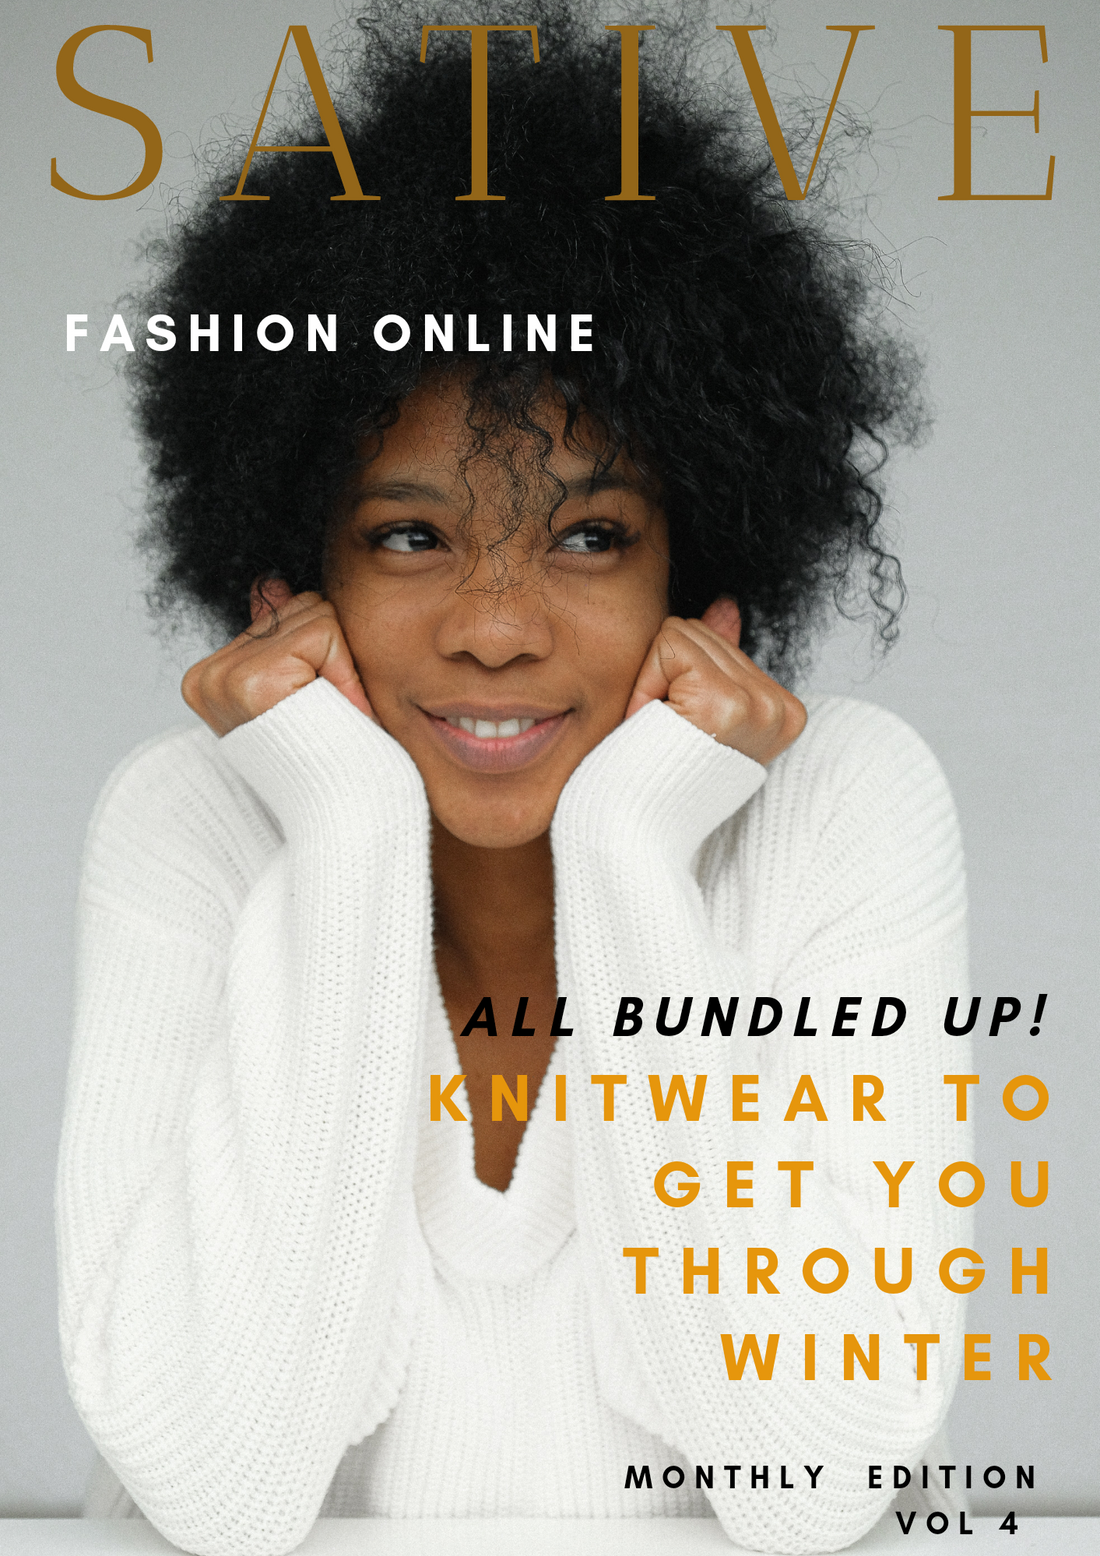 Knitwear to get you through winter